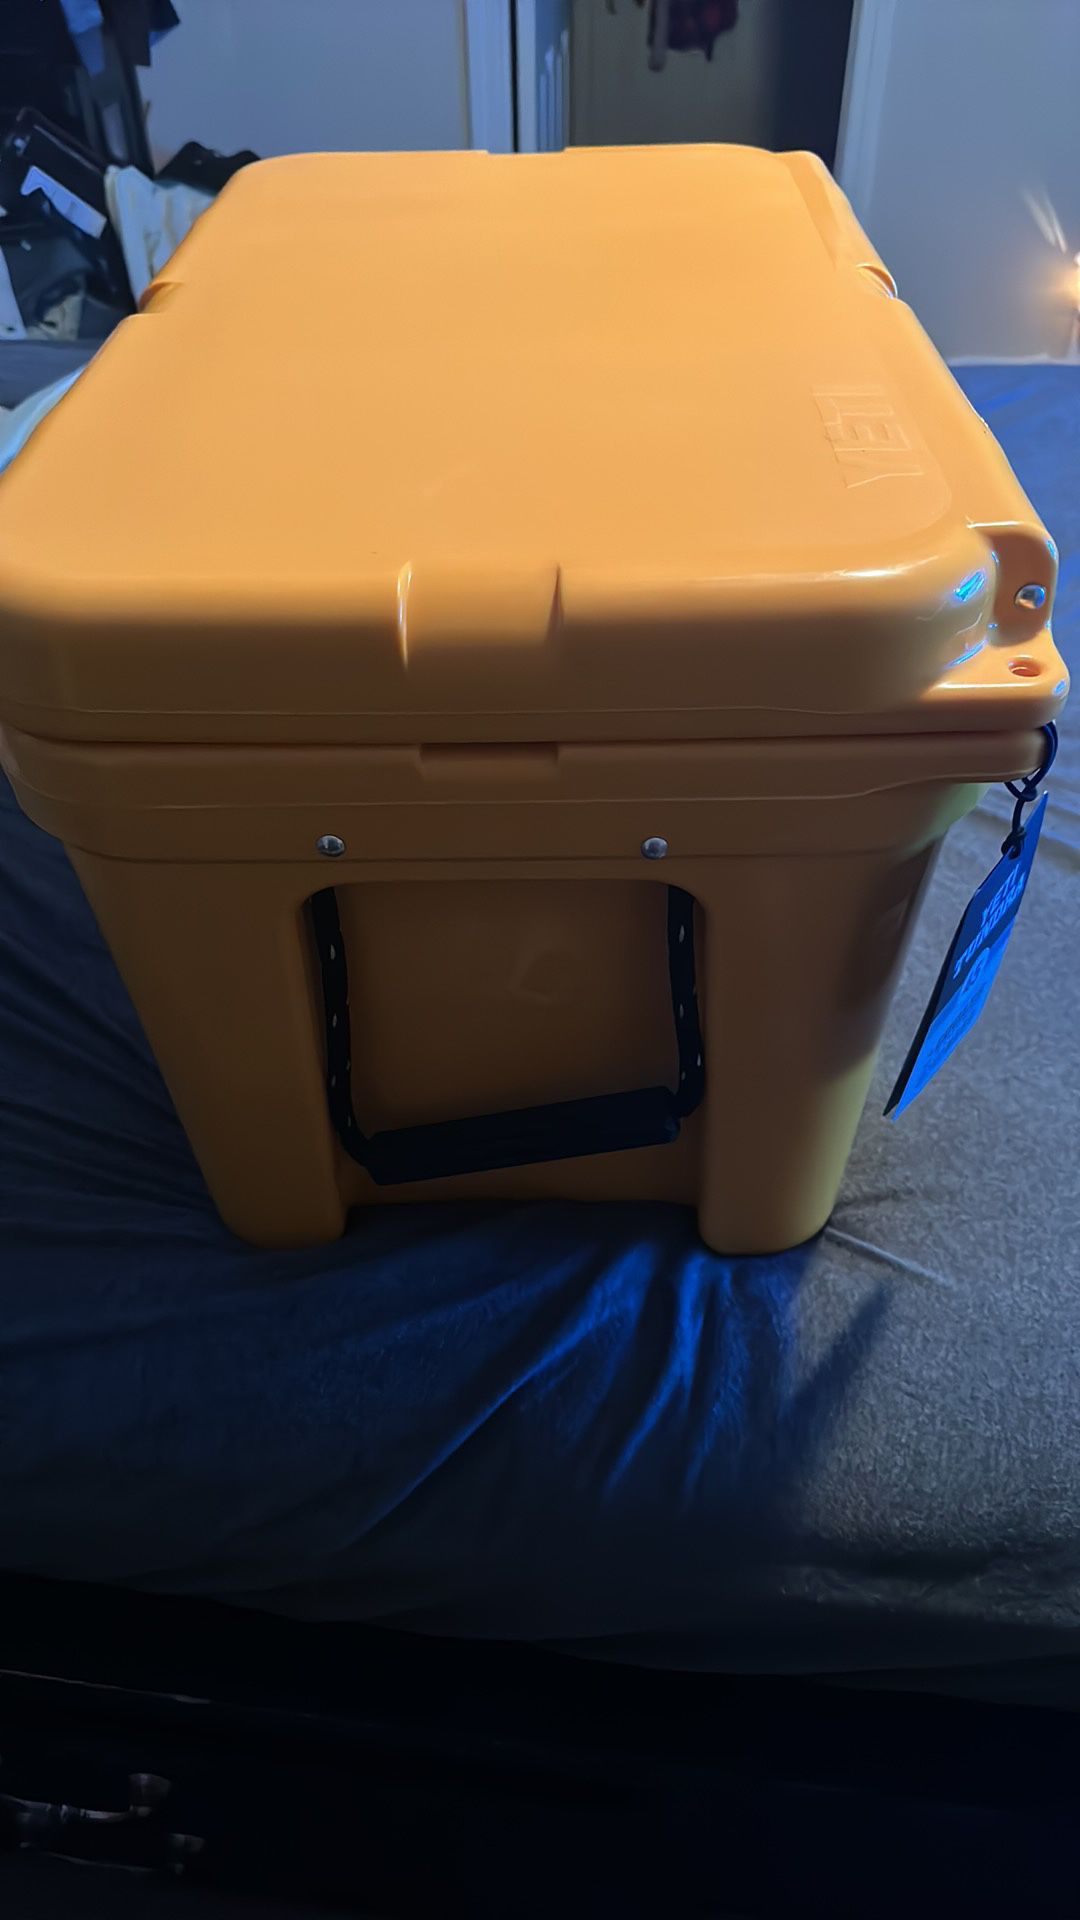 YETI TUNDRA HAUL reef blue YT60-12 Portable 45 quarts Hard Cooler on Wheels  Brand New for Sale in Austin, TX - OfferUp